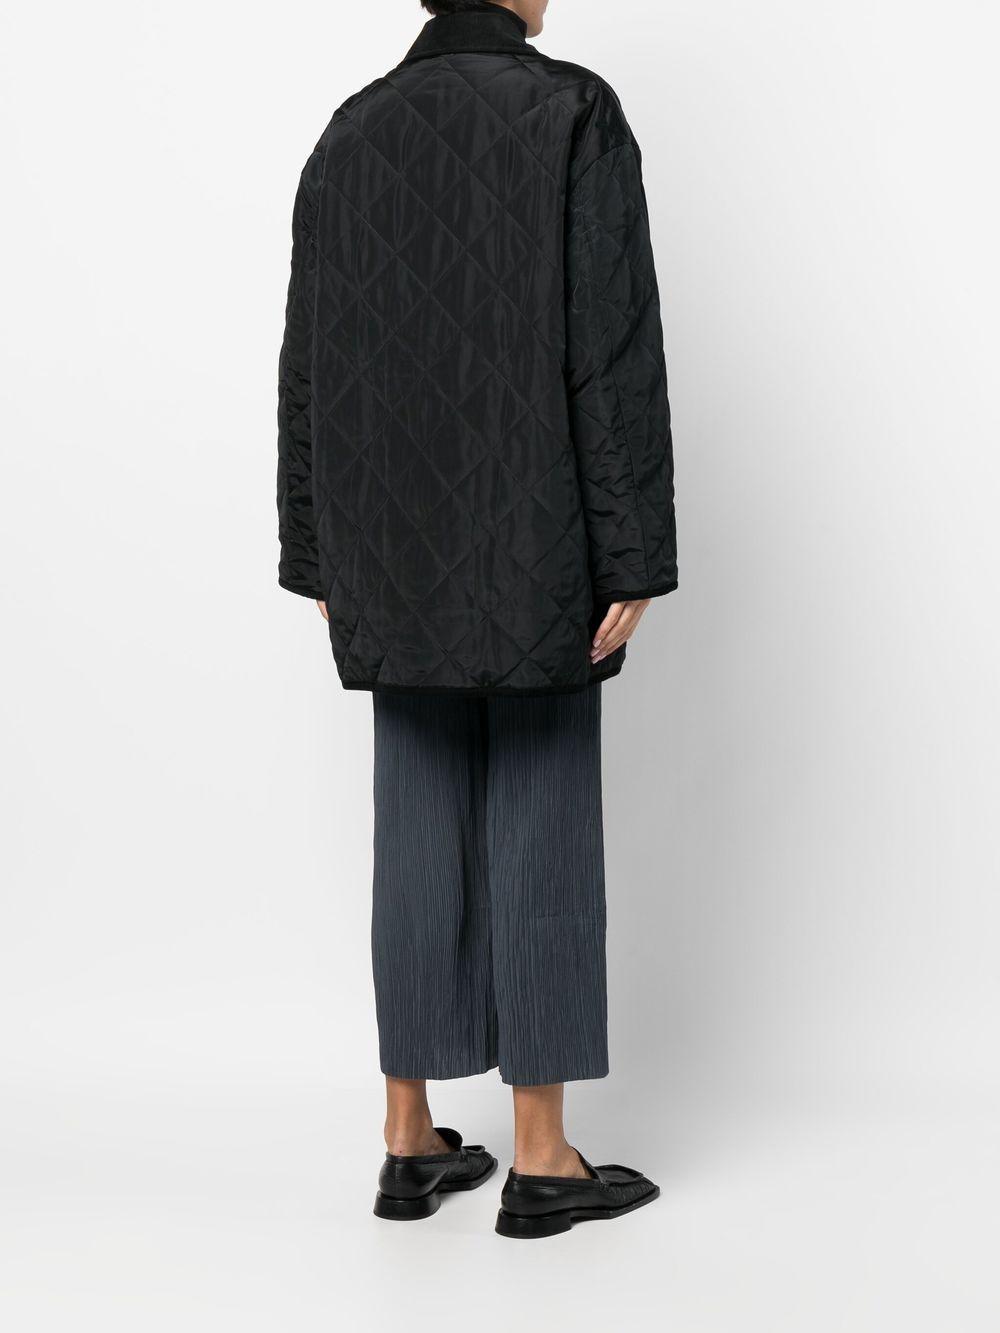 Filippa K Spread-collar Buttoned Quilted Jacket in Black | Lyst Australia